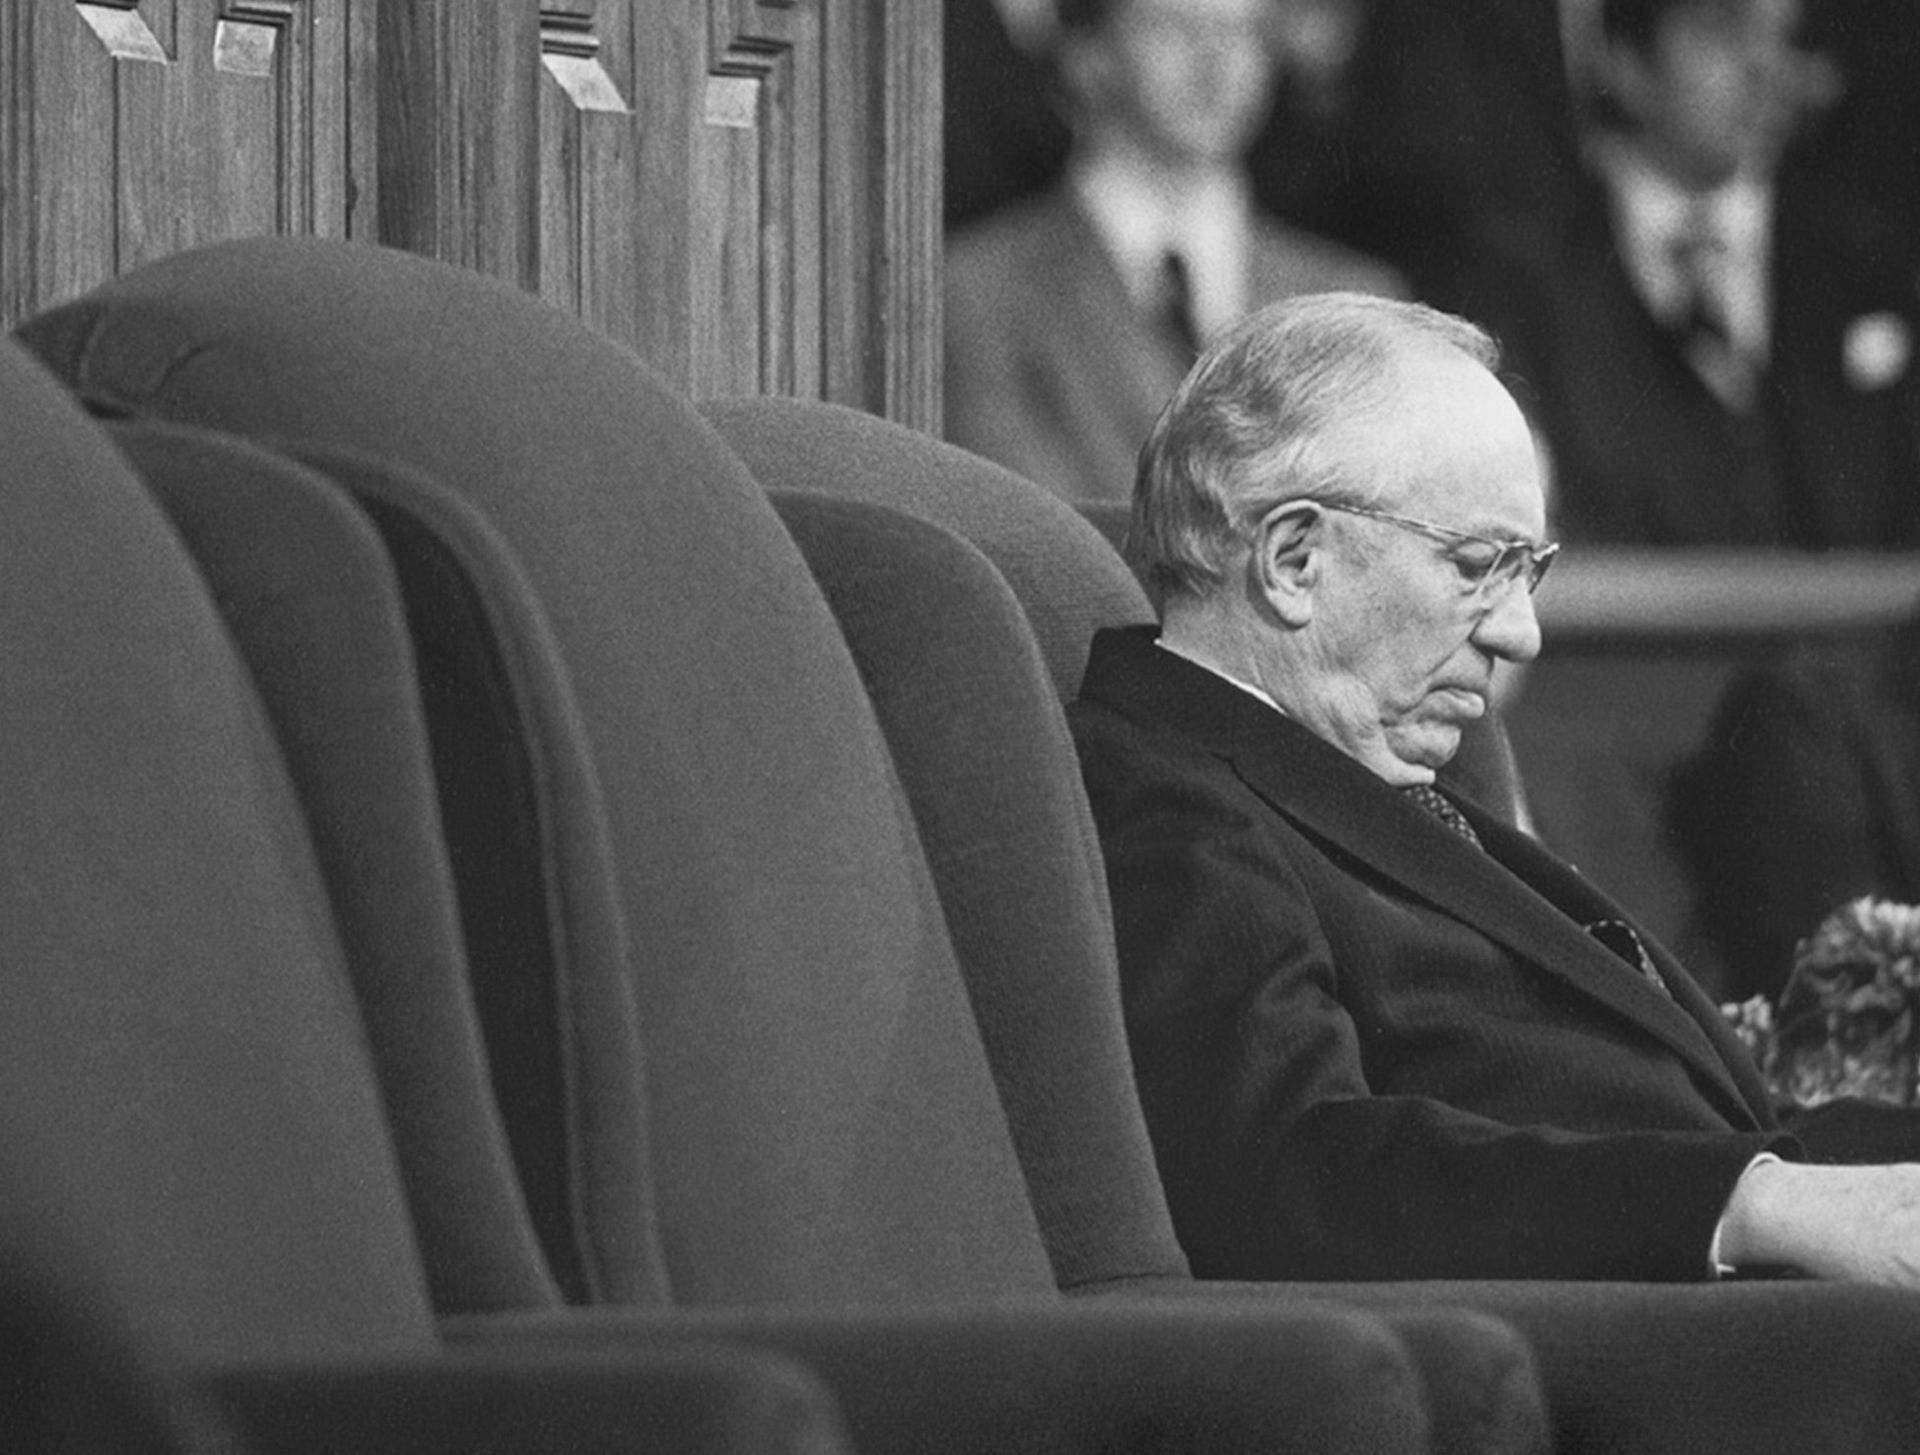 Between 1981 and 1985, Gordon B. Hinckley frequently presided at general conference alone due to Spencer W. Kimball’s and Marion G. Romney’s health problems.